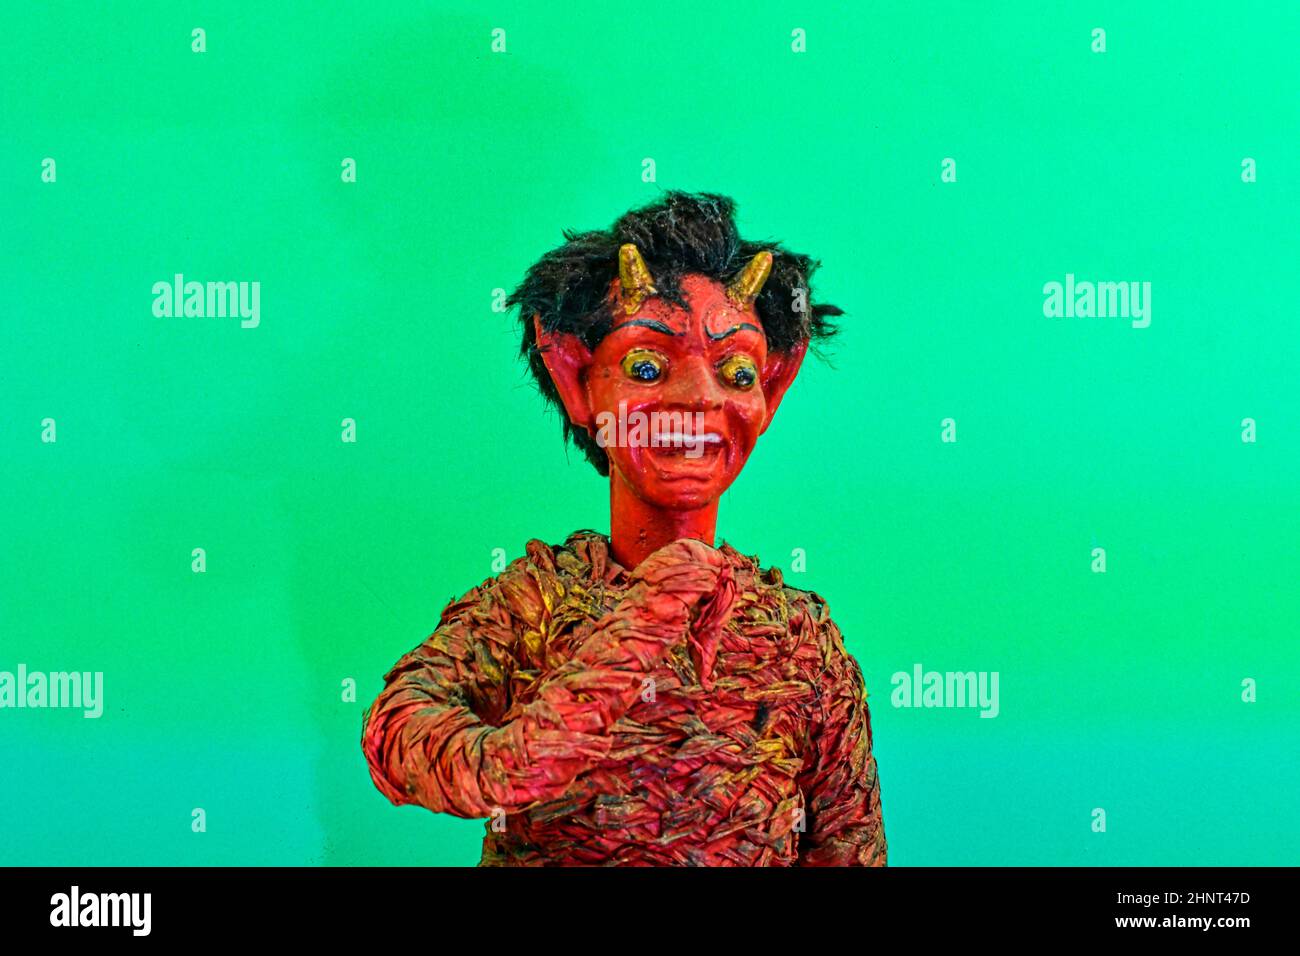 Figure of Krampus or devil. Central European tradition. The Krampus or devil is in the tradition of a fright figure in the company of St. Nicholas. Devil figure on green background Stock Photo